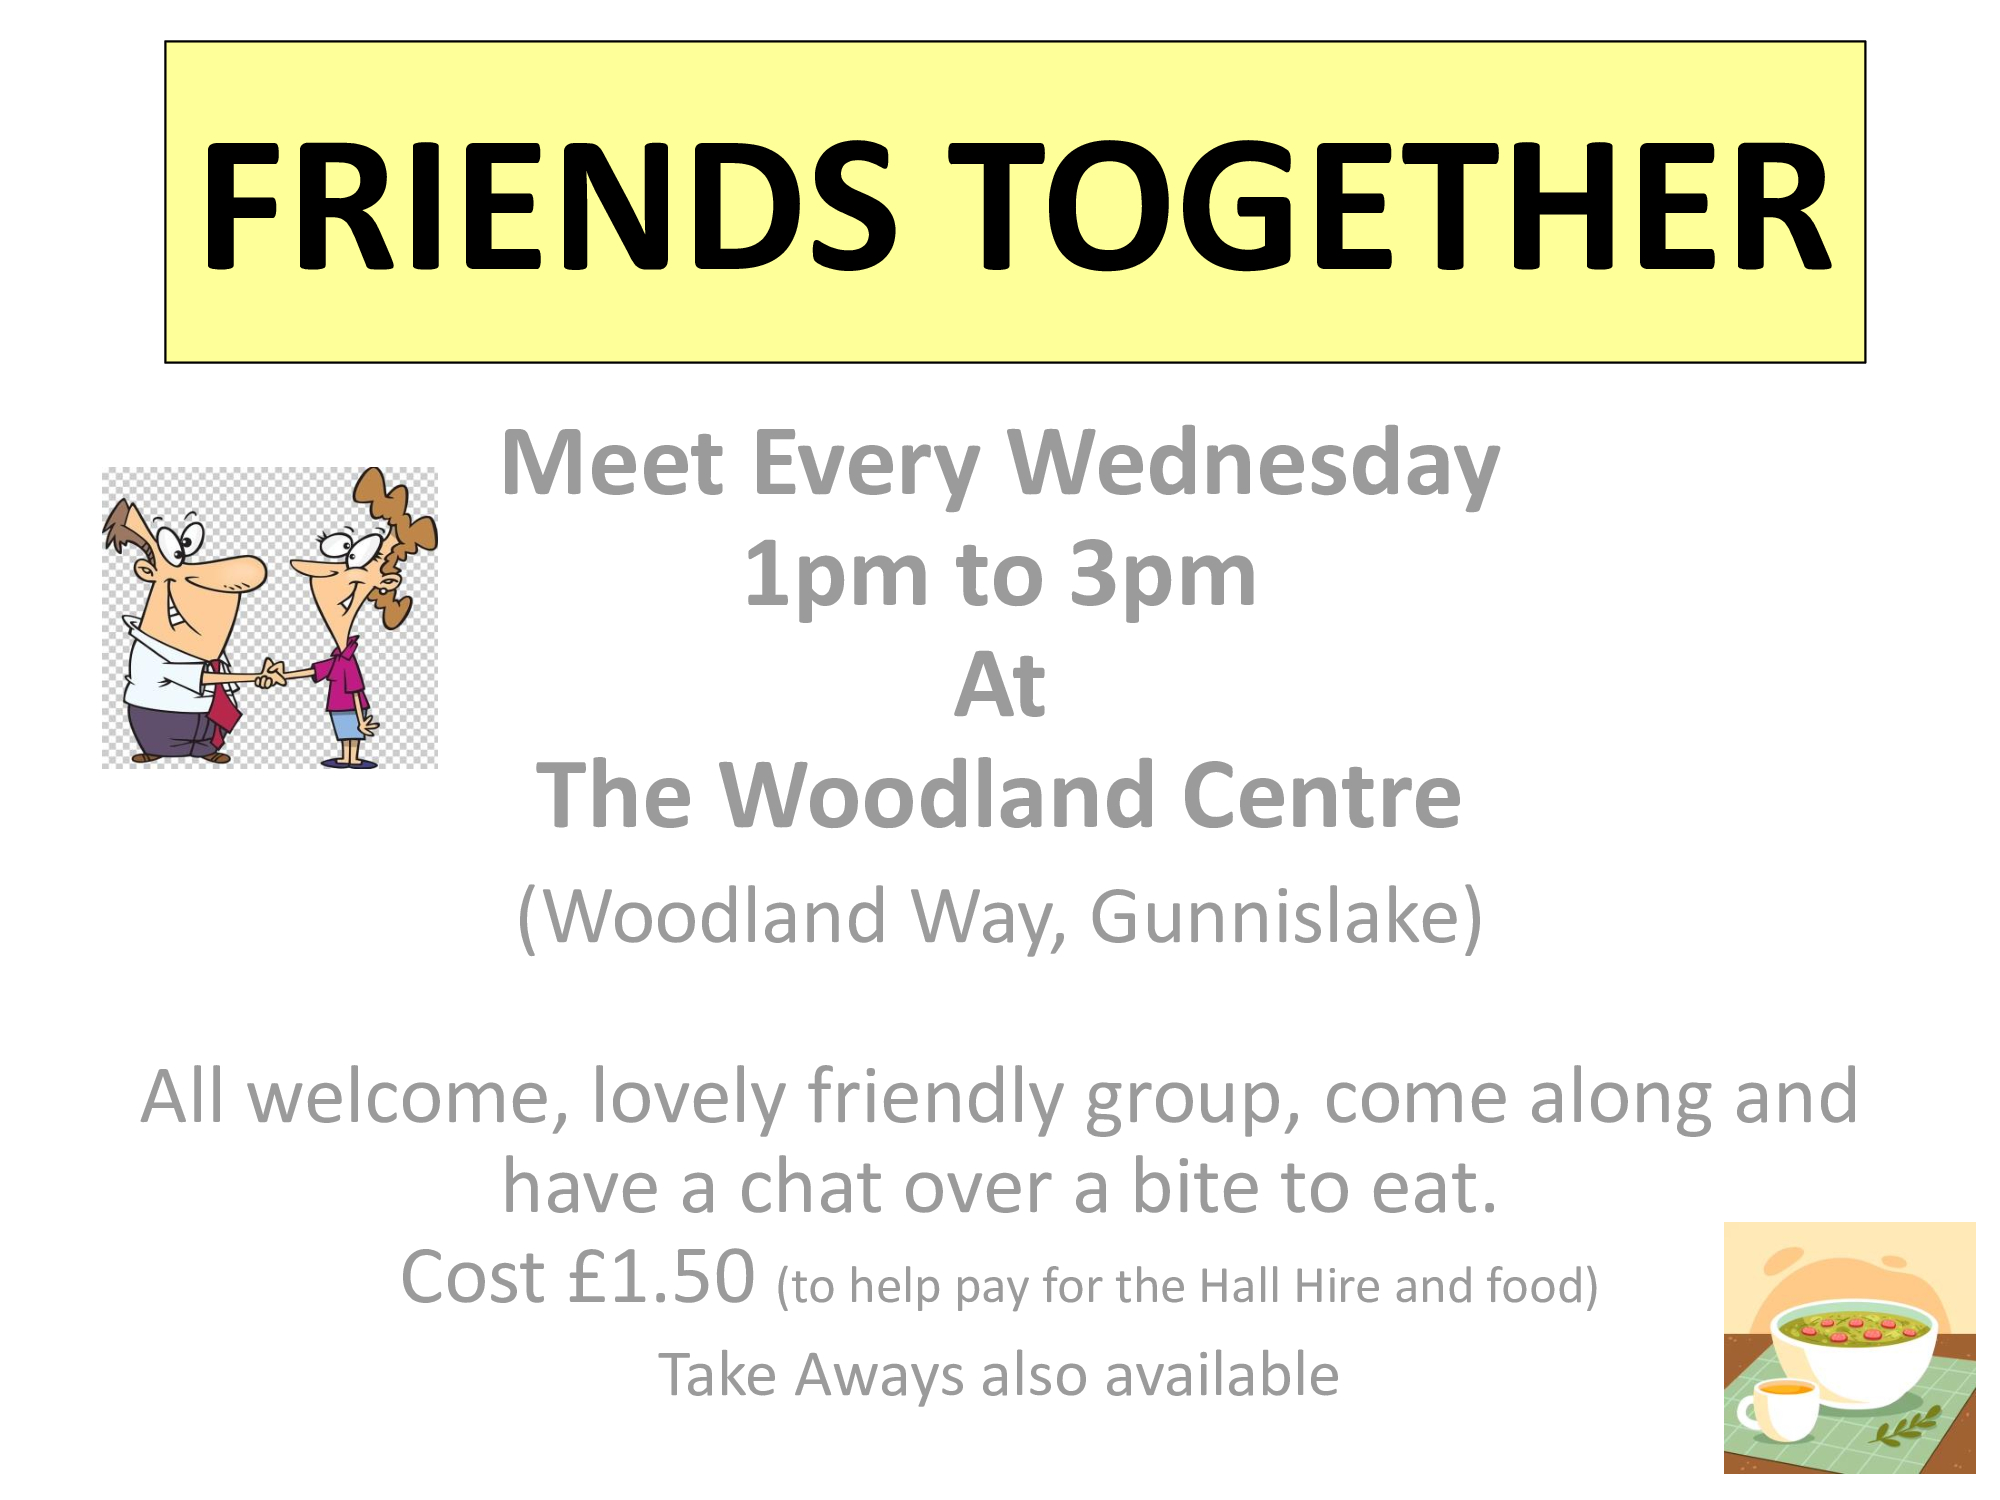 Friends Together weekly lunch club at The Woodland Centre